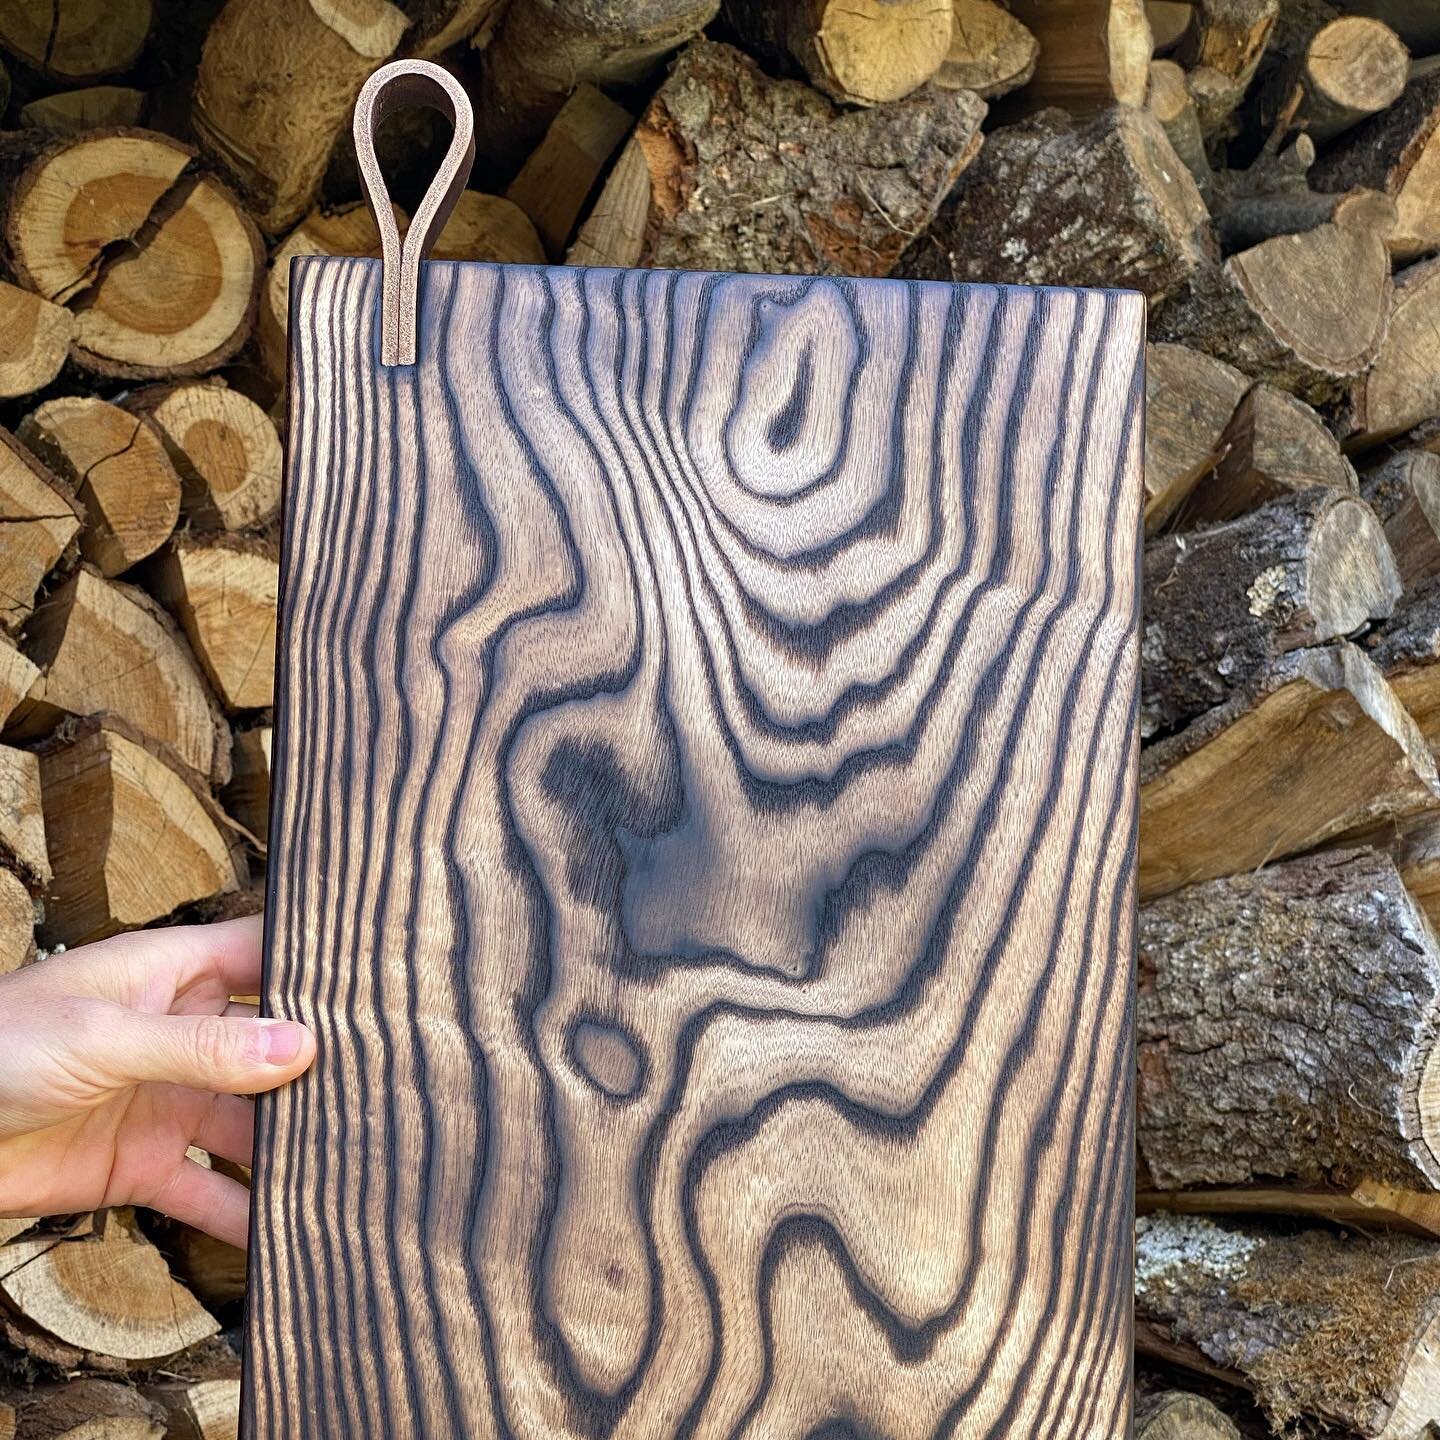 Scorched Ash boards back in stock on my online shop! 

Unfortunately I don&rsquo;t ship outside the UK. I feel it goes against my principals of using local materials and sustainability.

#kitchendesign #kitchenware #devon #dartmoor #ashburton #wood #